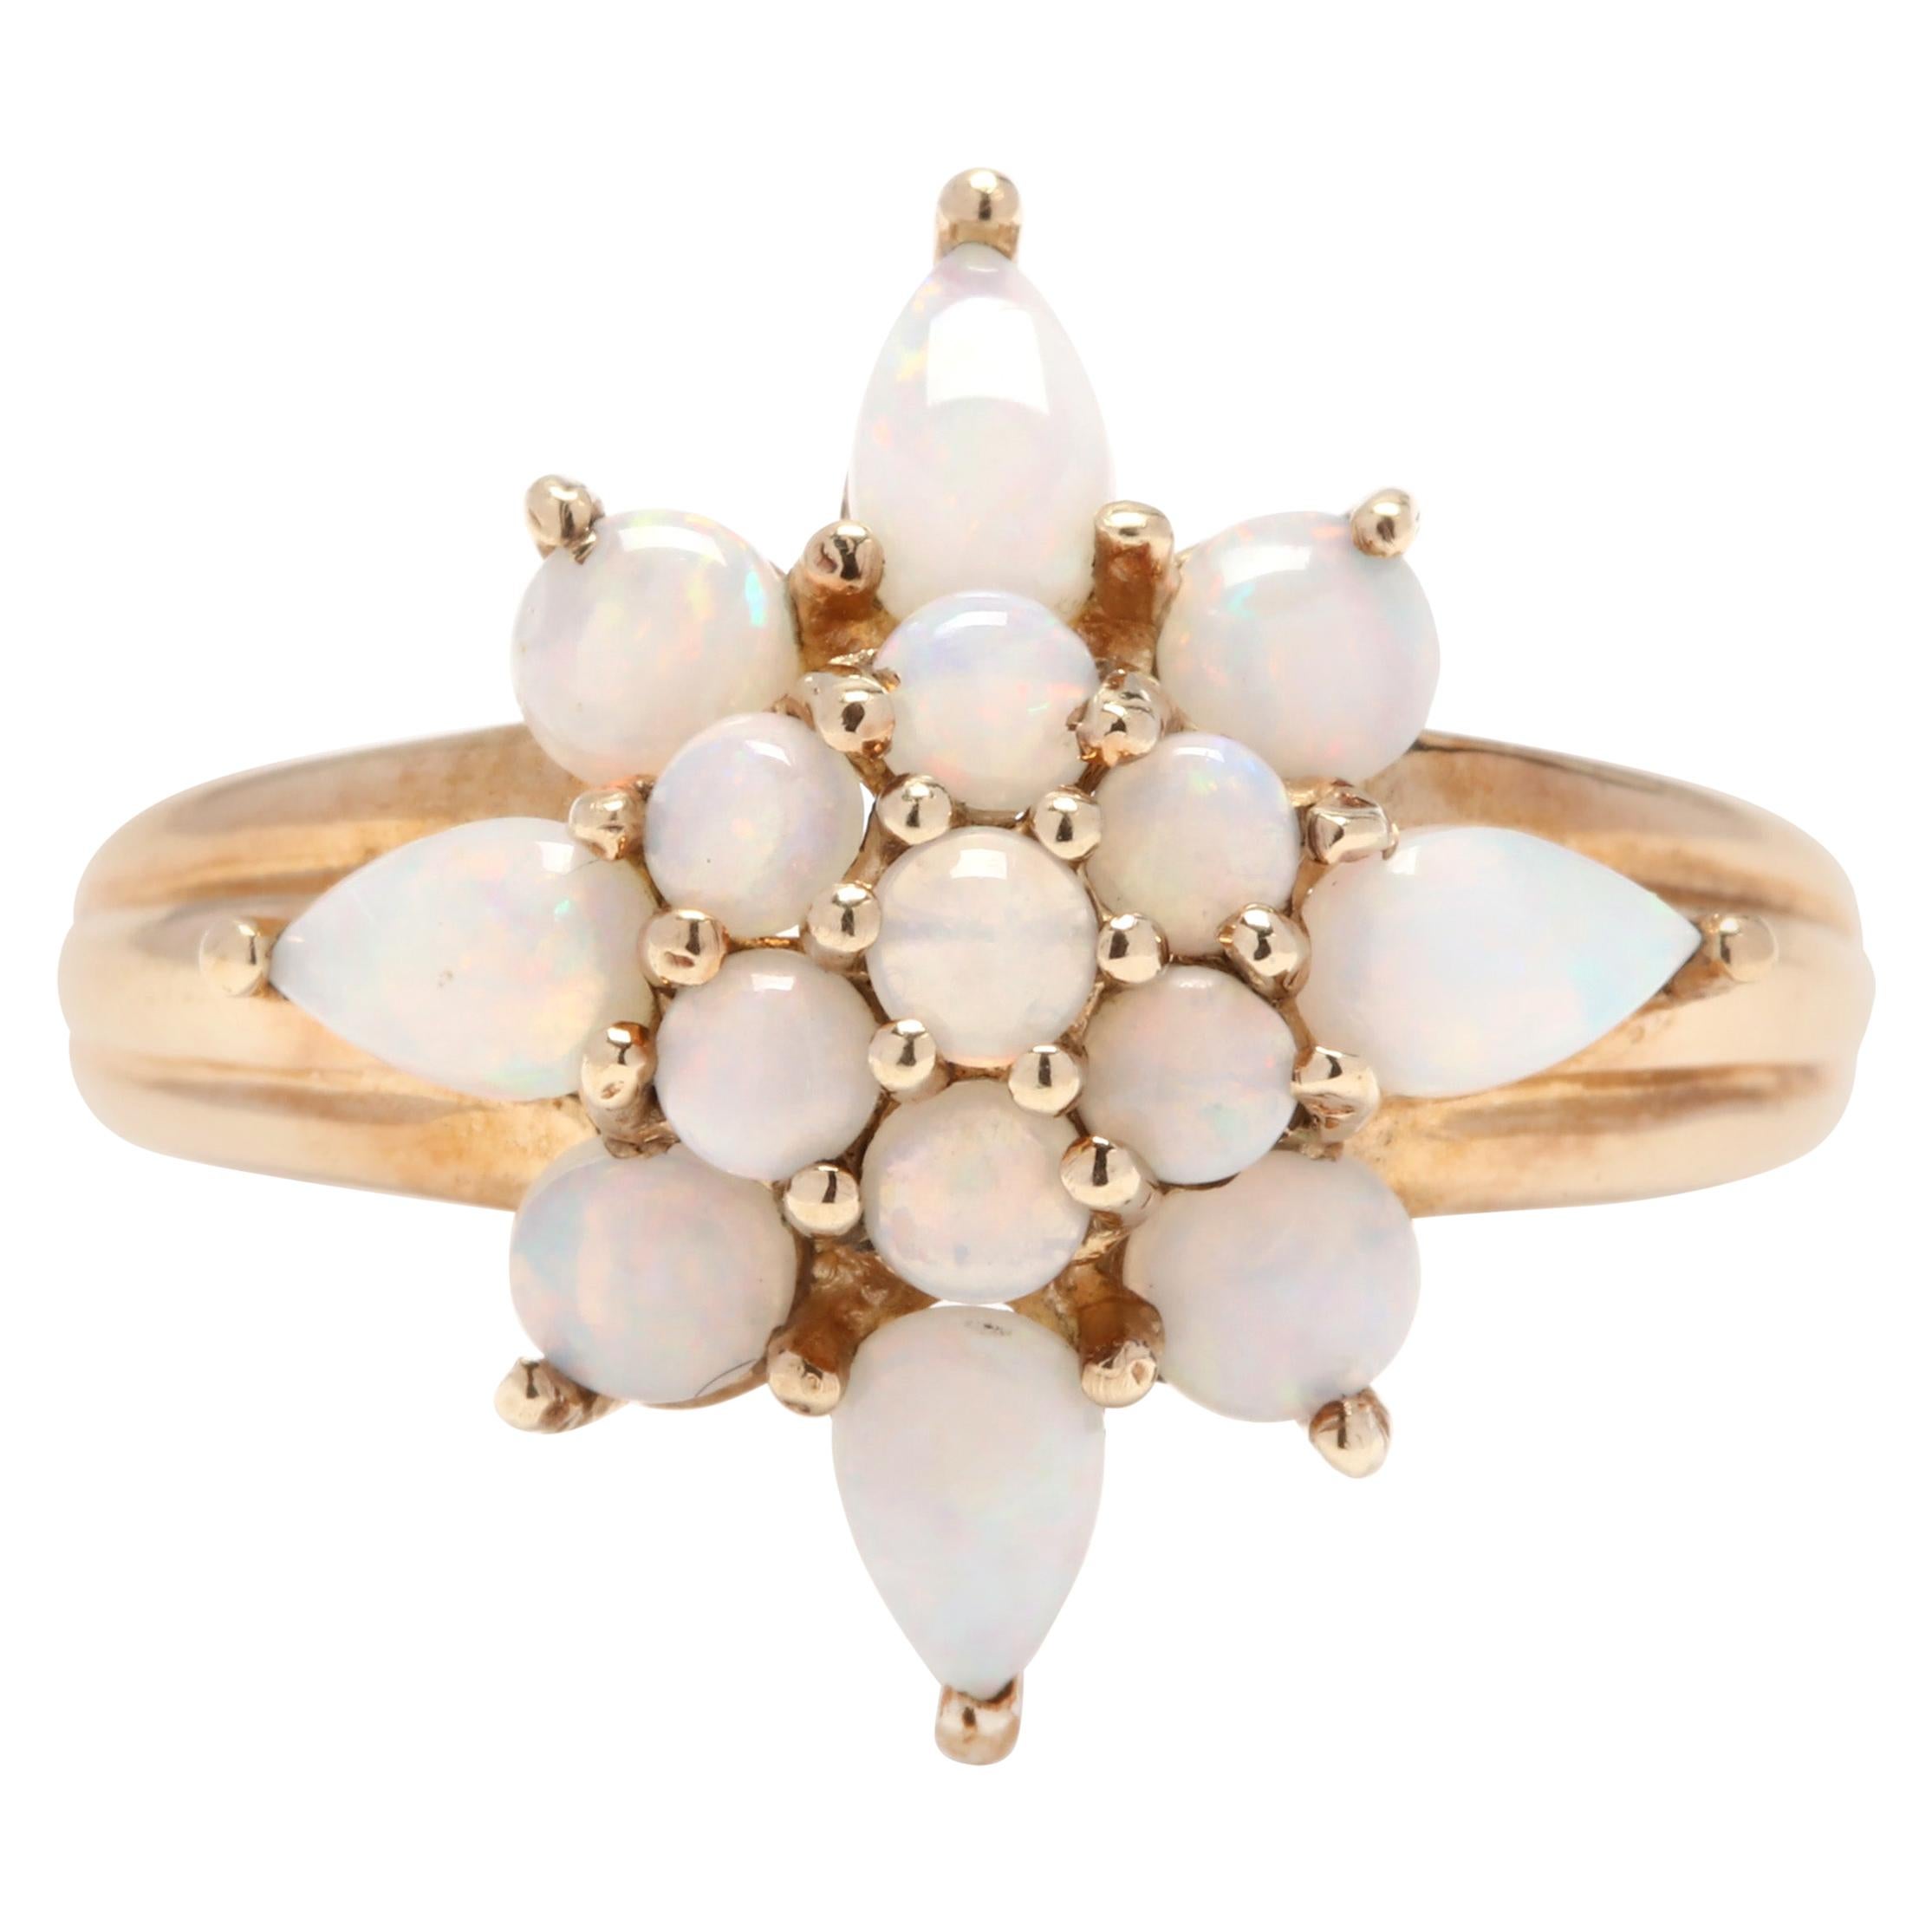 10 Karat Yellow Gold and Opal Star Statement / Cocktail Ring